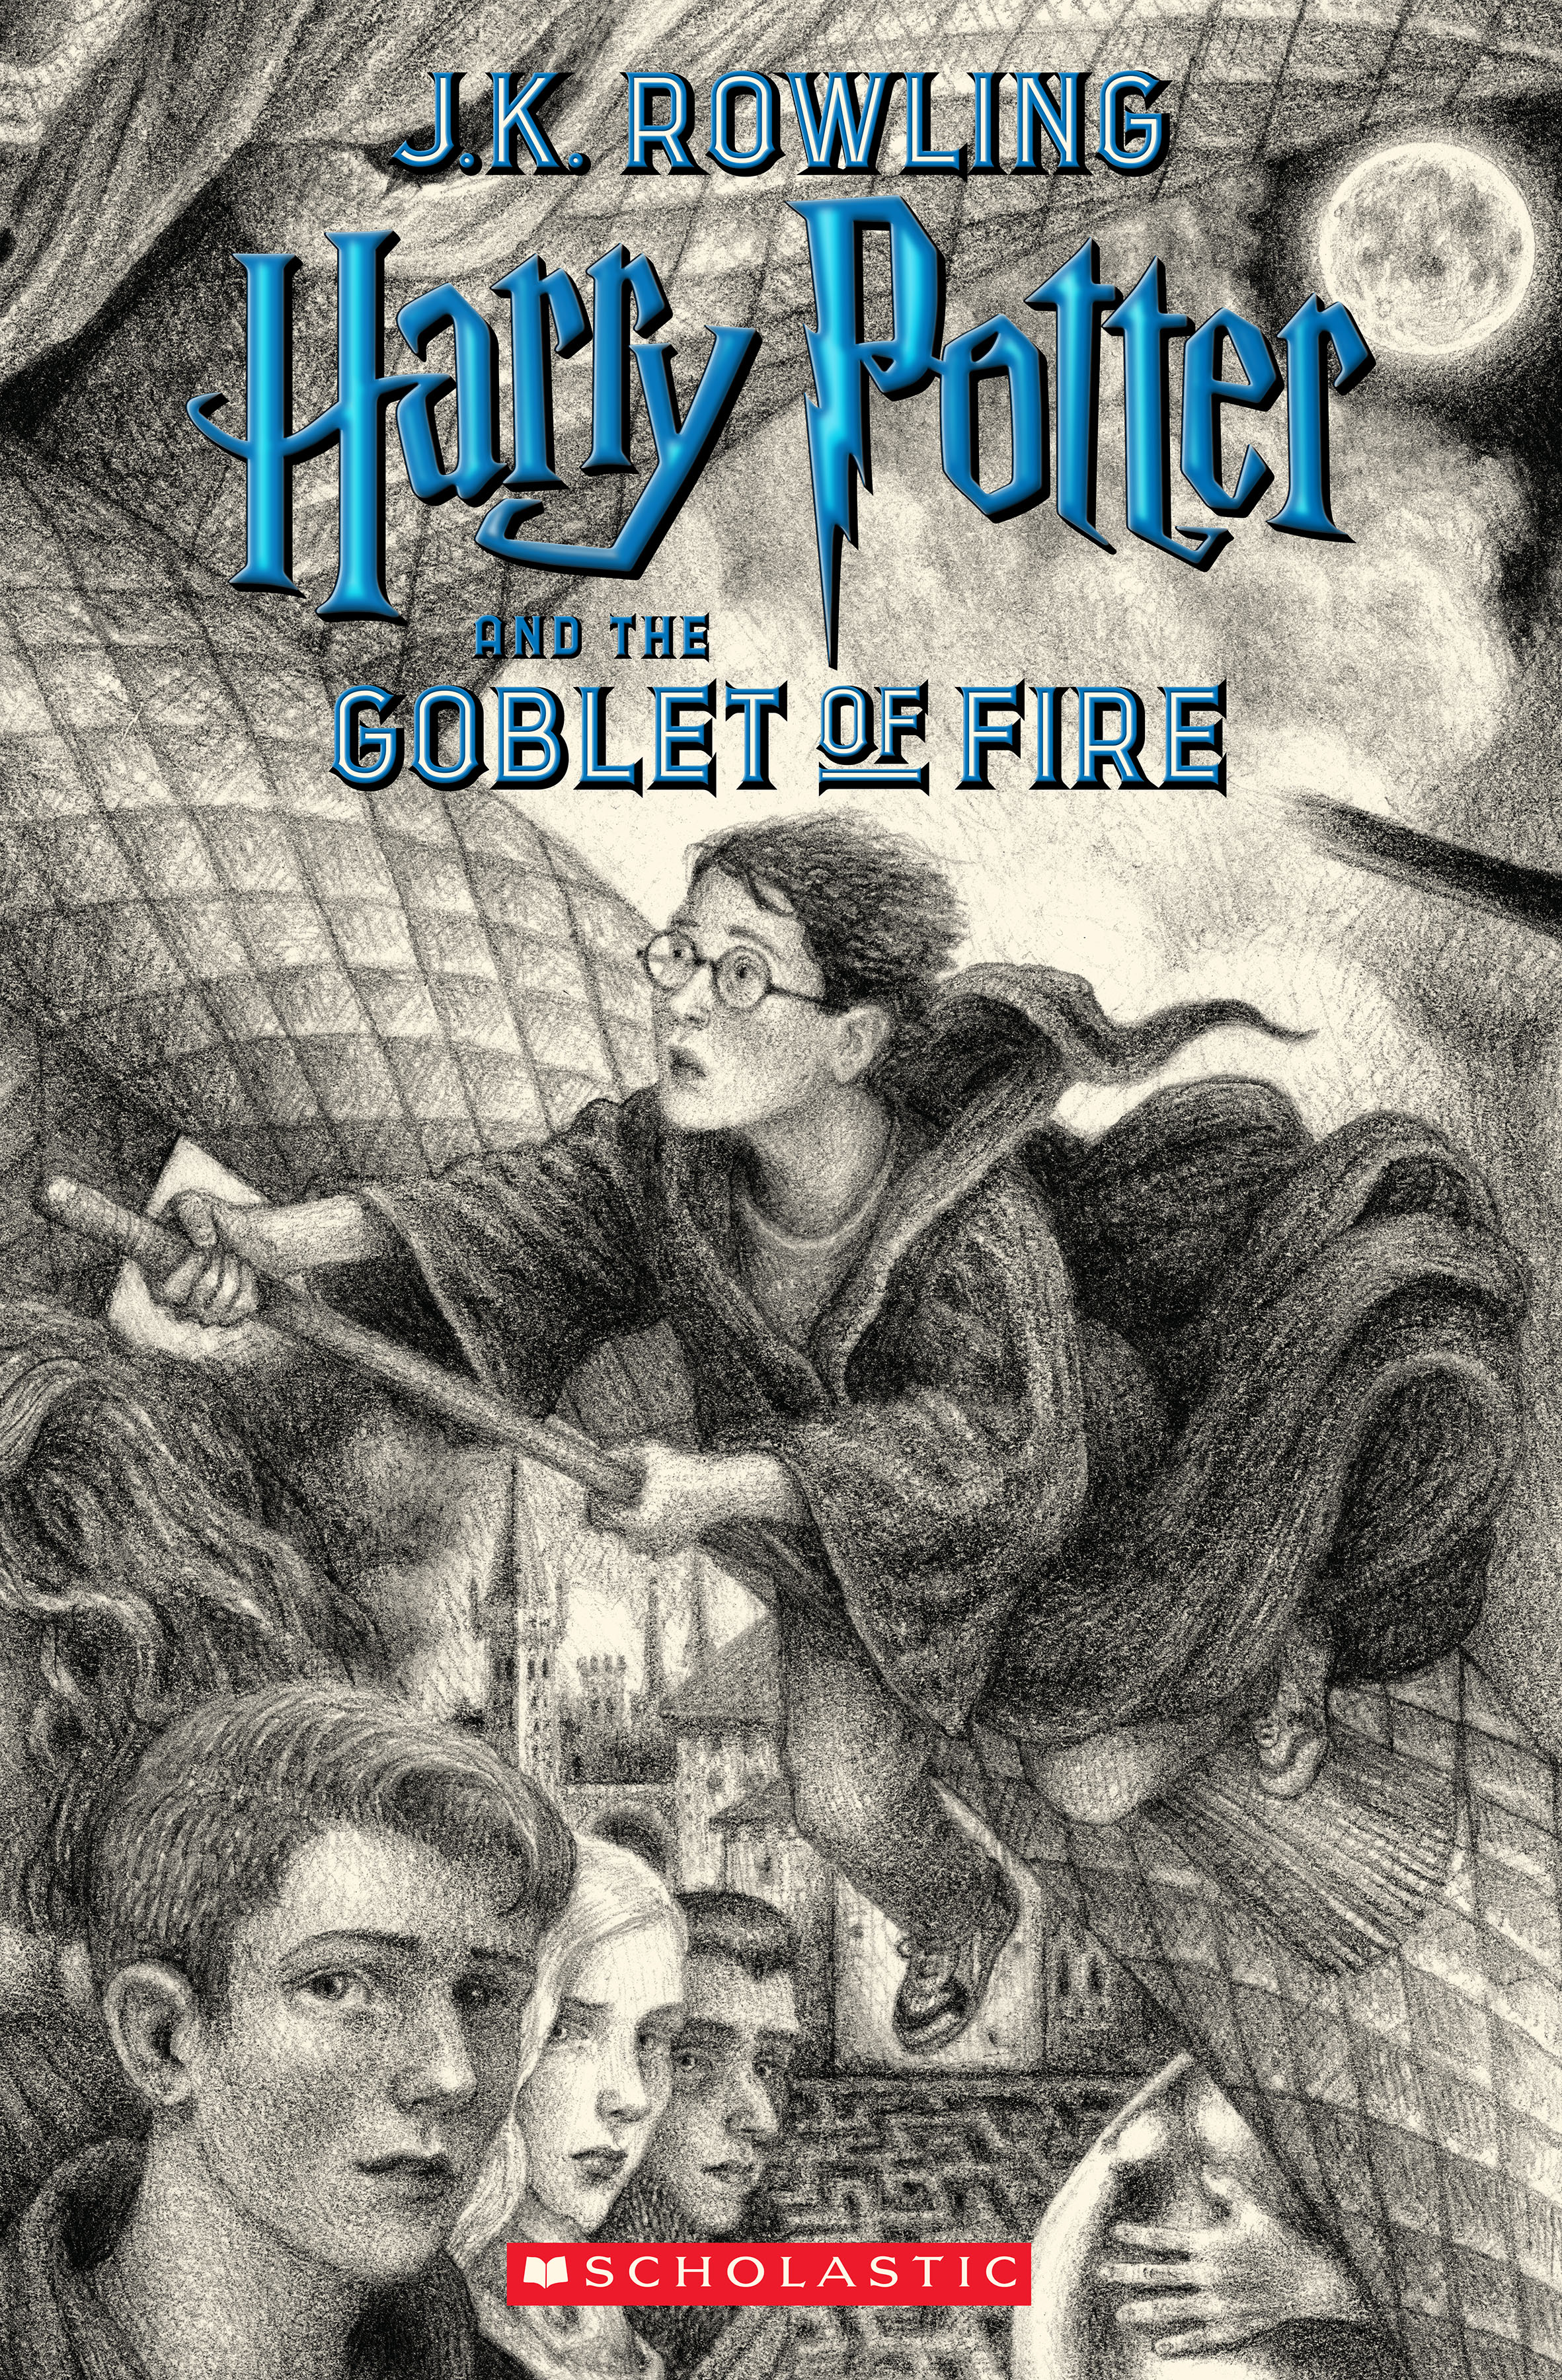 Scholastic Unveils New Covers for J.K. Rowling’s Harry Potter Series